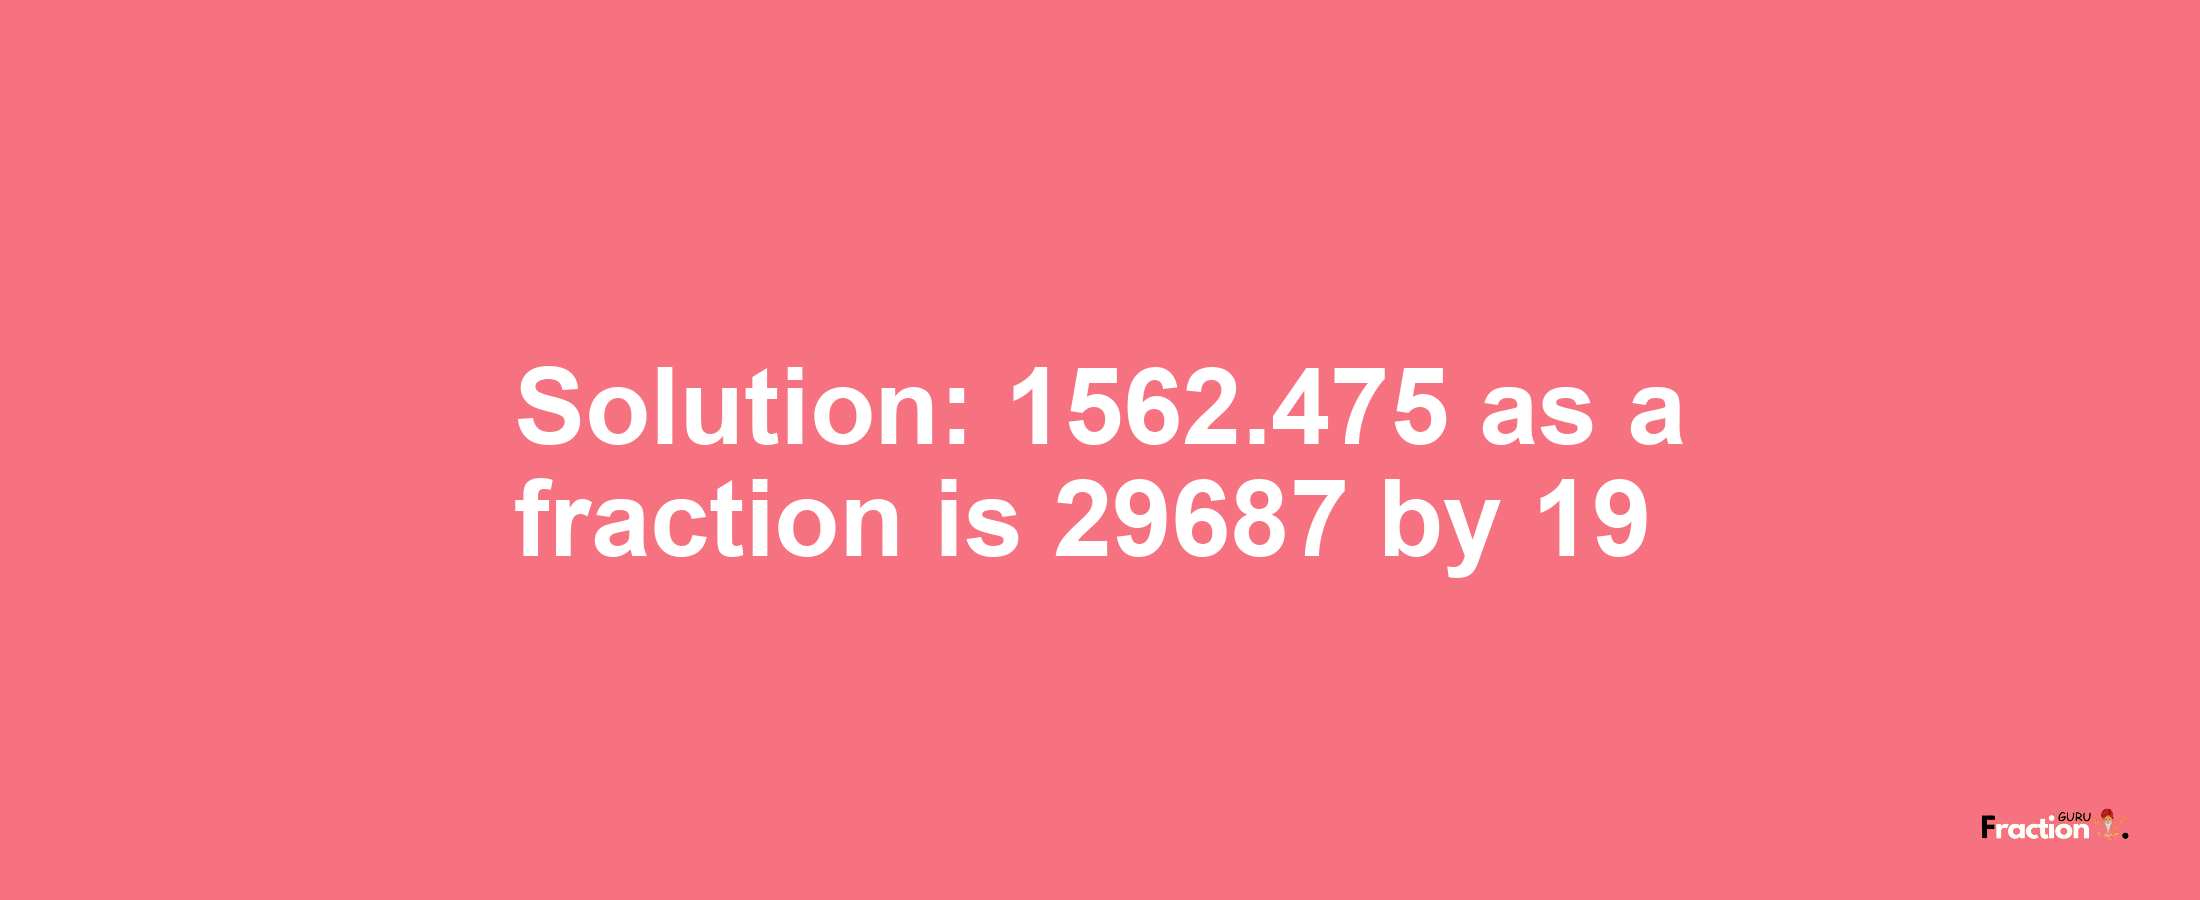 Solution:1562.475 as a fraction is 29687/19